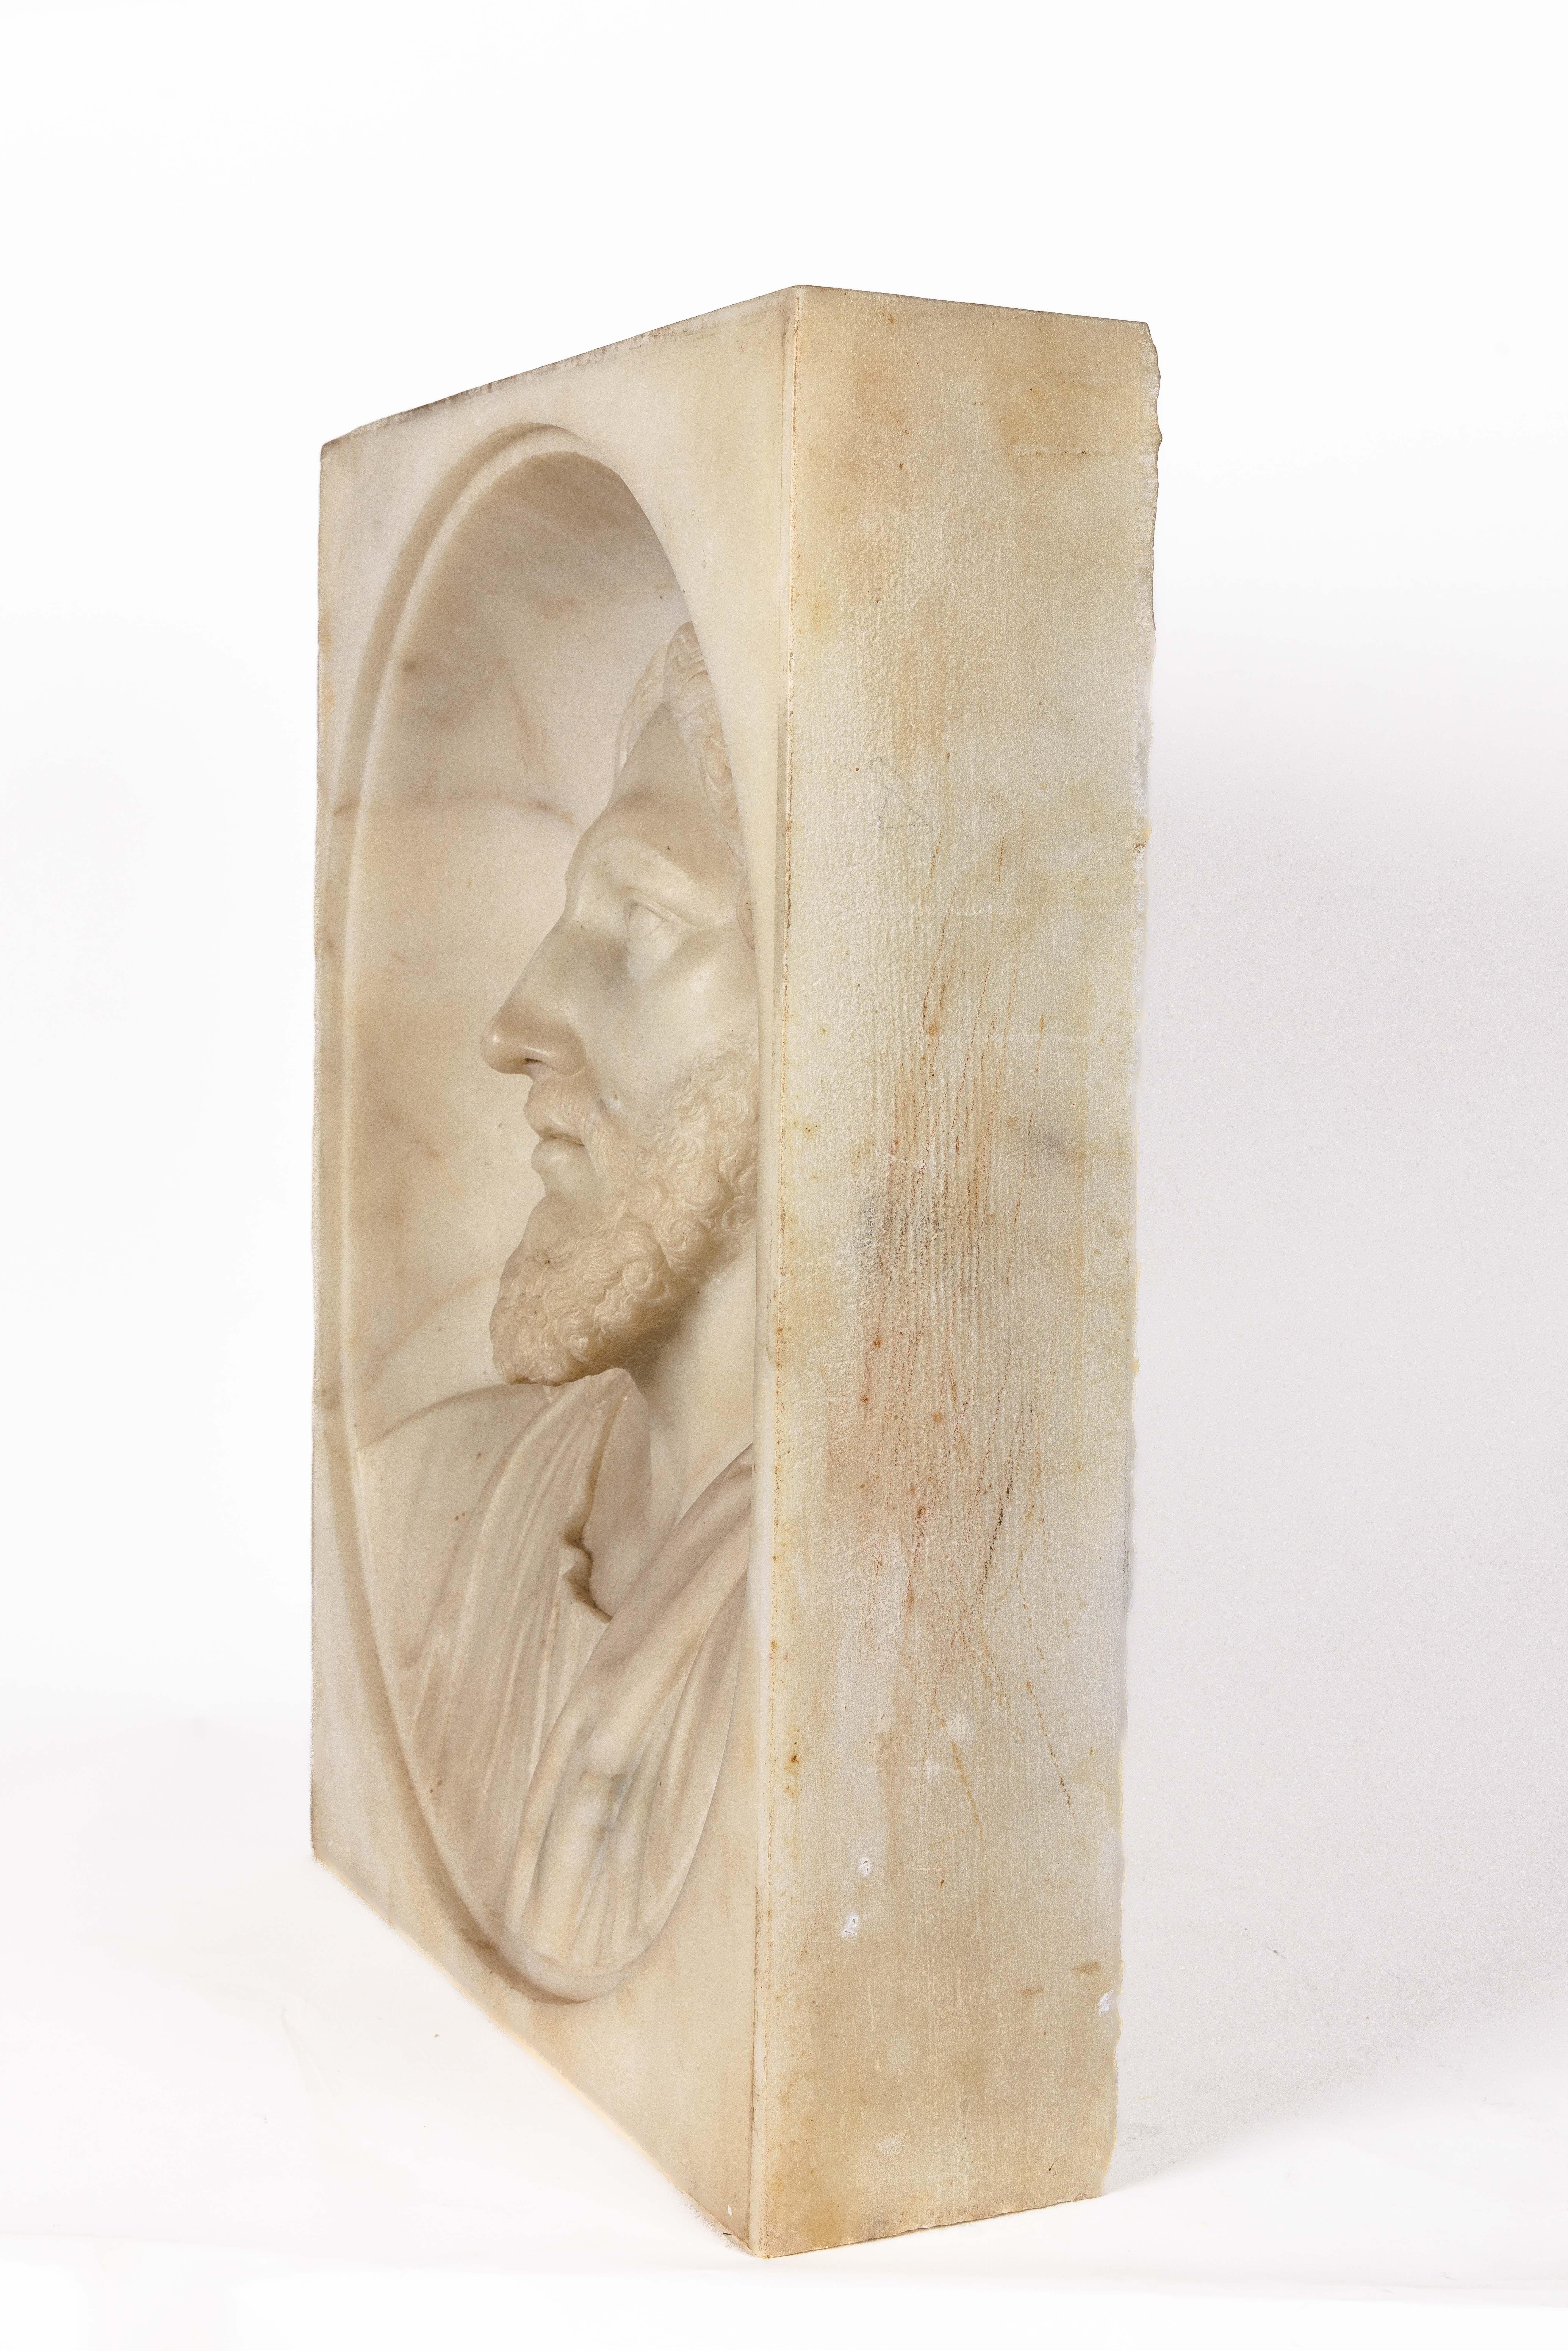 Rare and Important Italian White Marble Bust Sculpture of Jesus Christ, C. 1850 For Sale 9